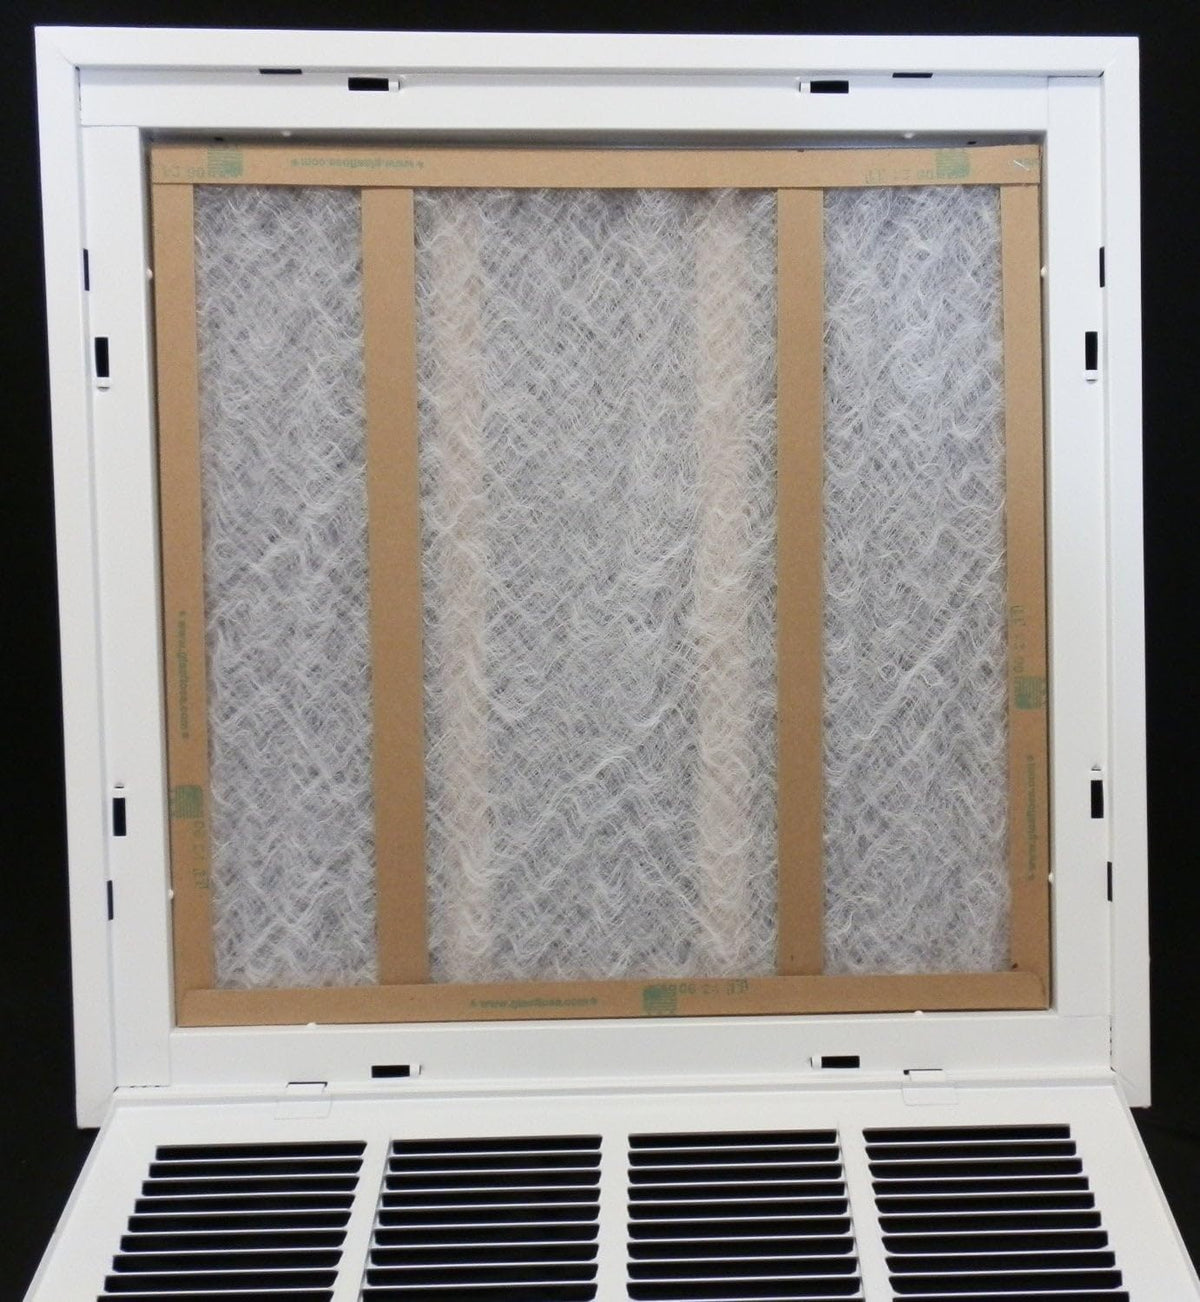 14&quot; X 14&quot; Steel Return Air Filter Grille for 1&quot; Filter - Removable Frame - * Filter Included * [Outer Dimensions: 16 5/8&quot; X 16 5/8&quot;]